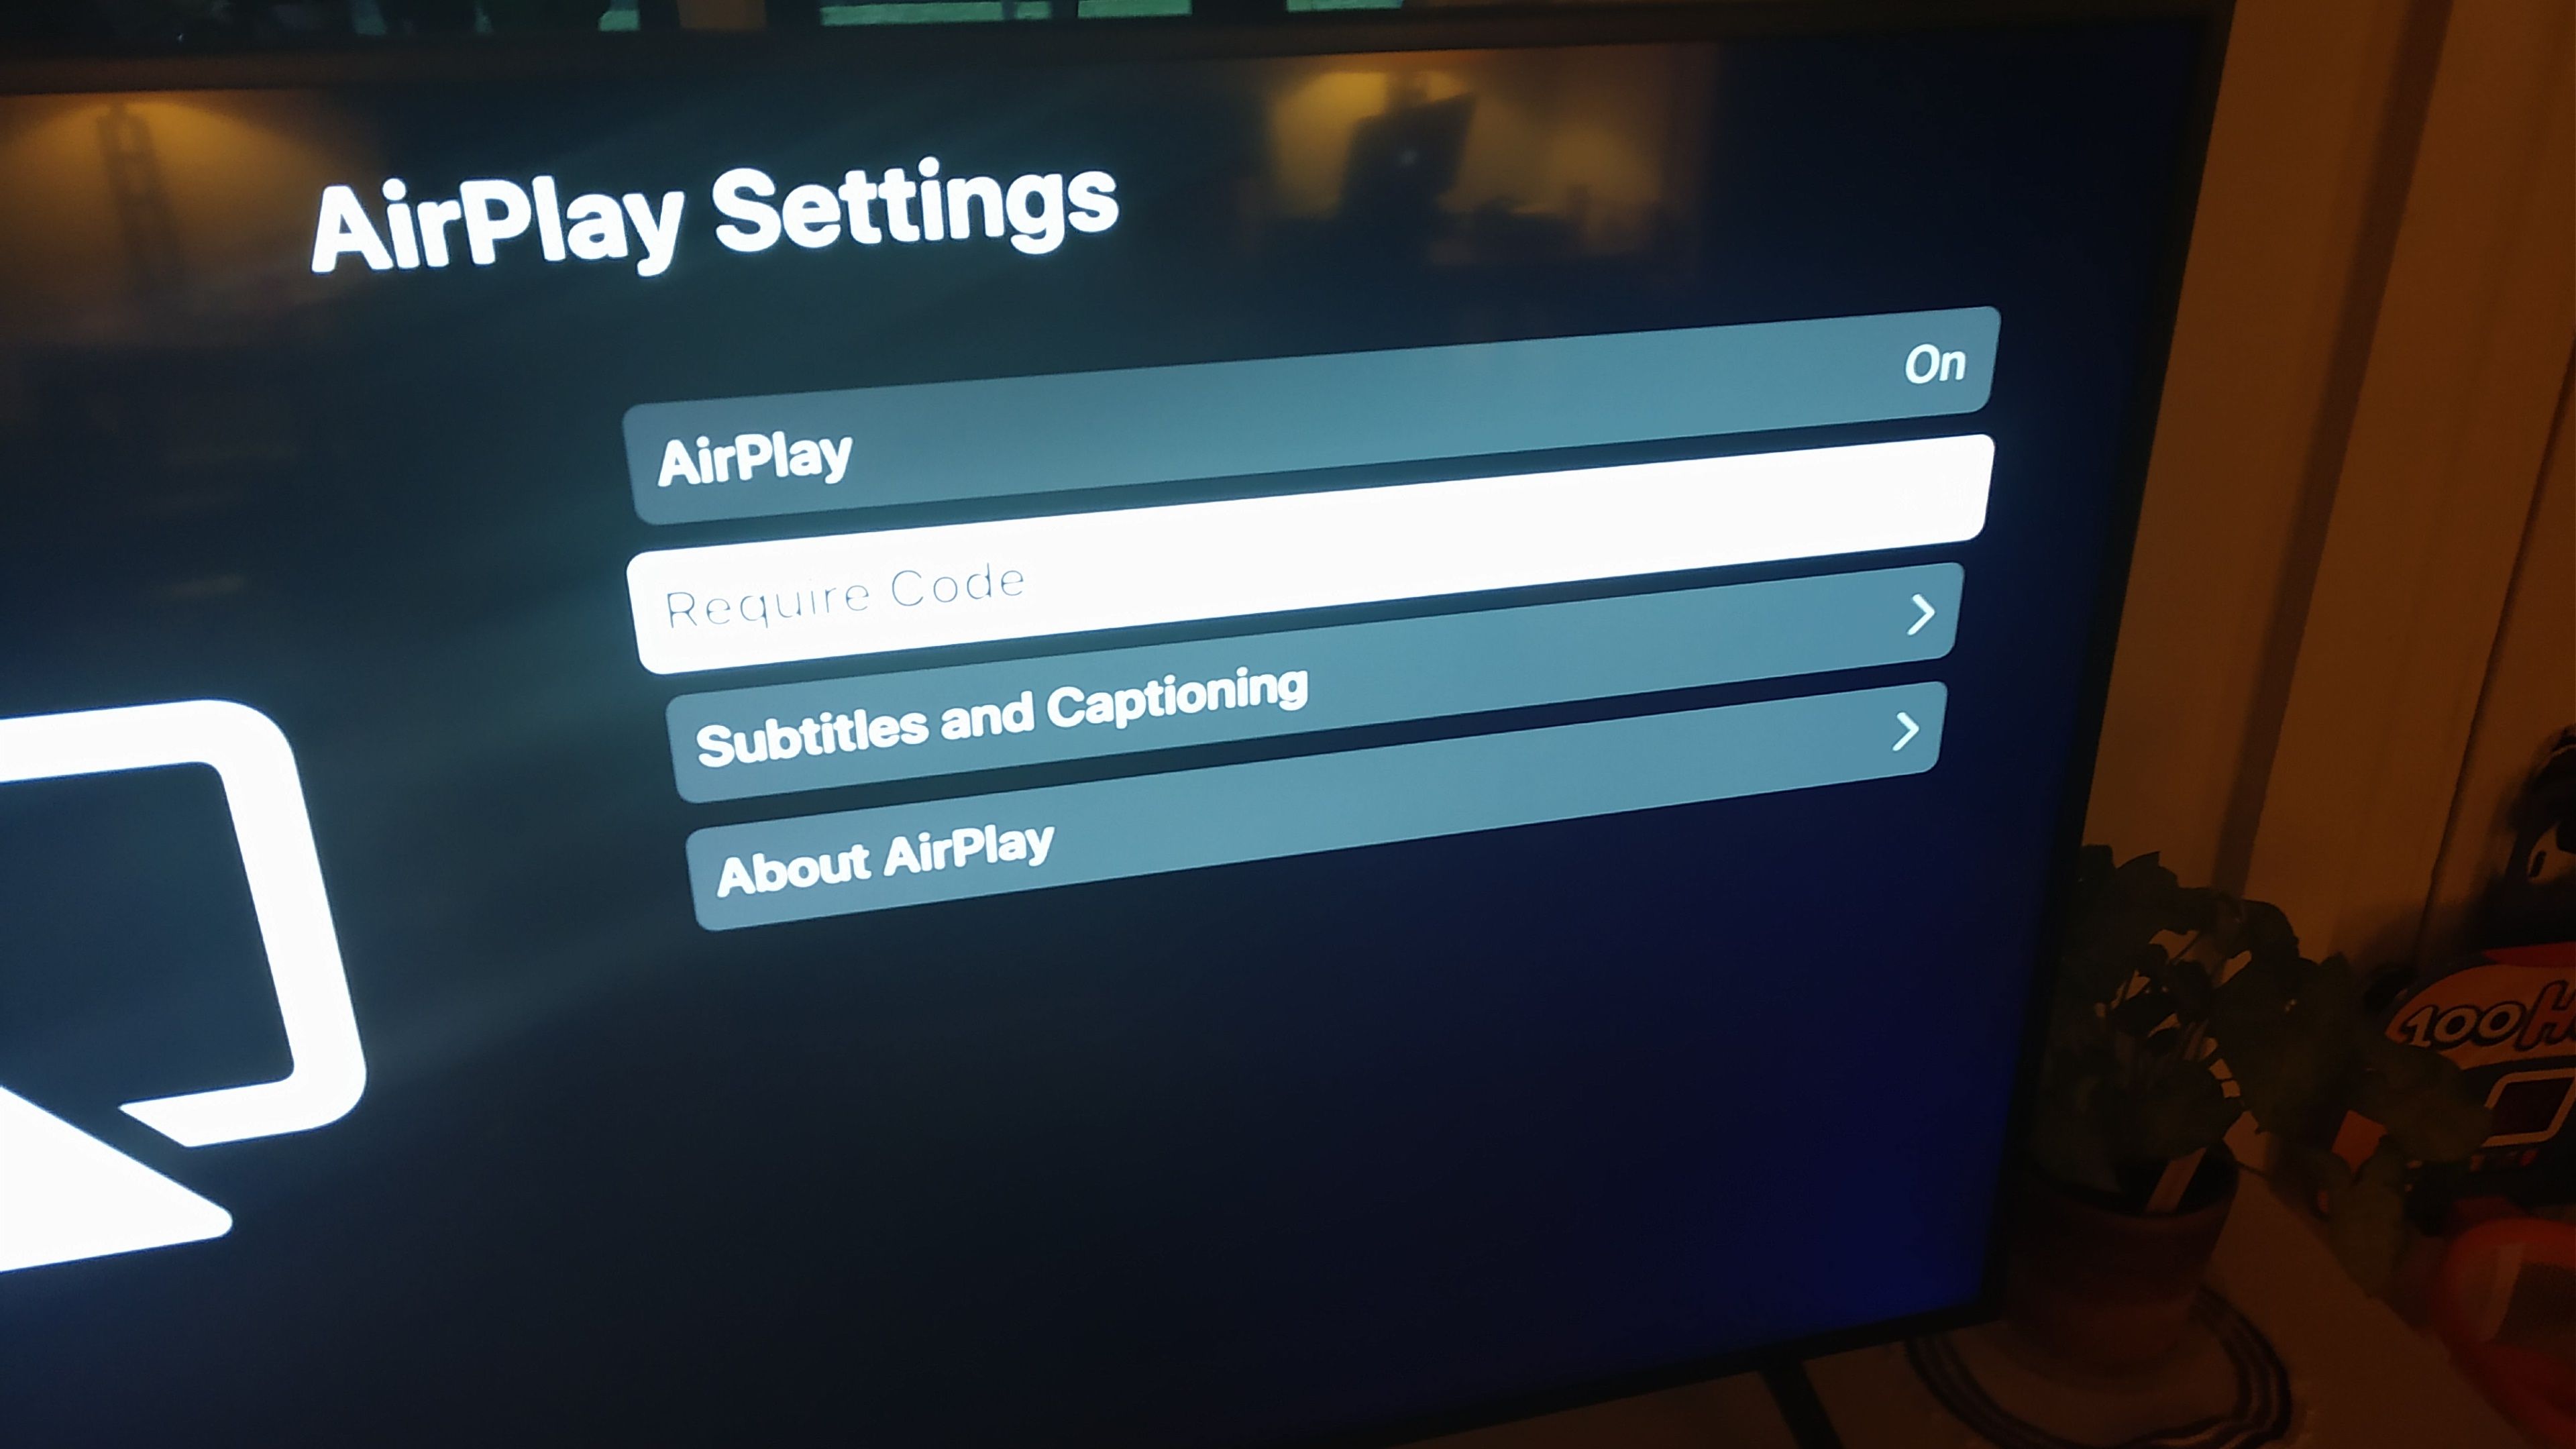 Solved: AirPlay 2 problem - Page 6 - Samsung Community